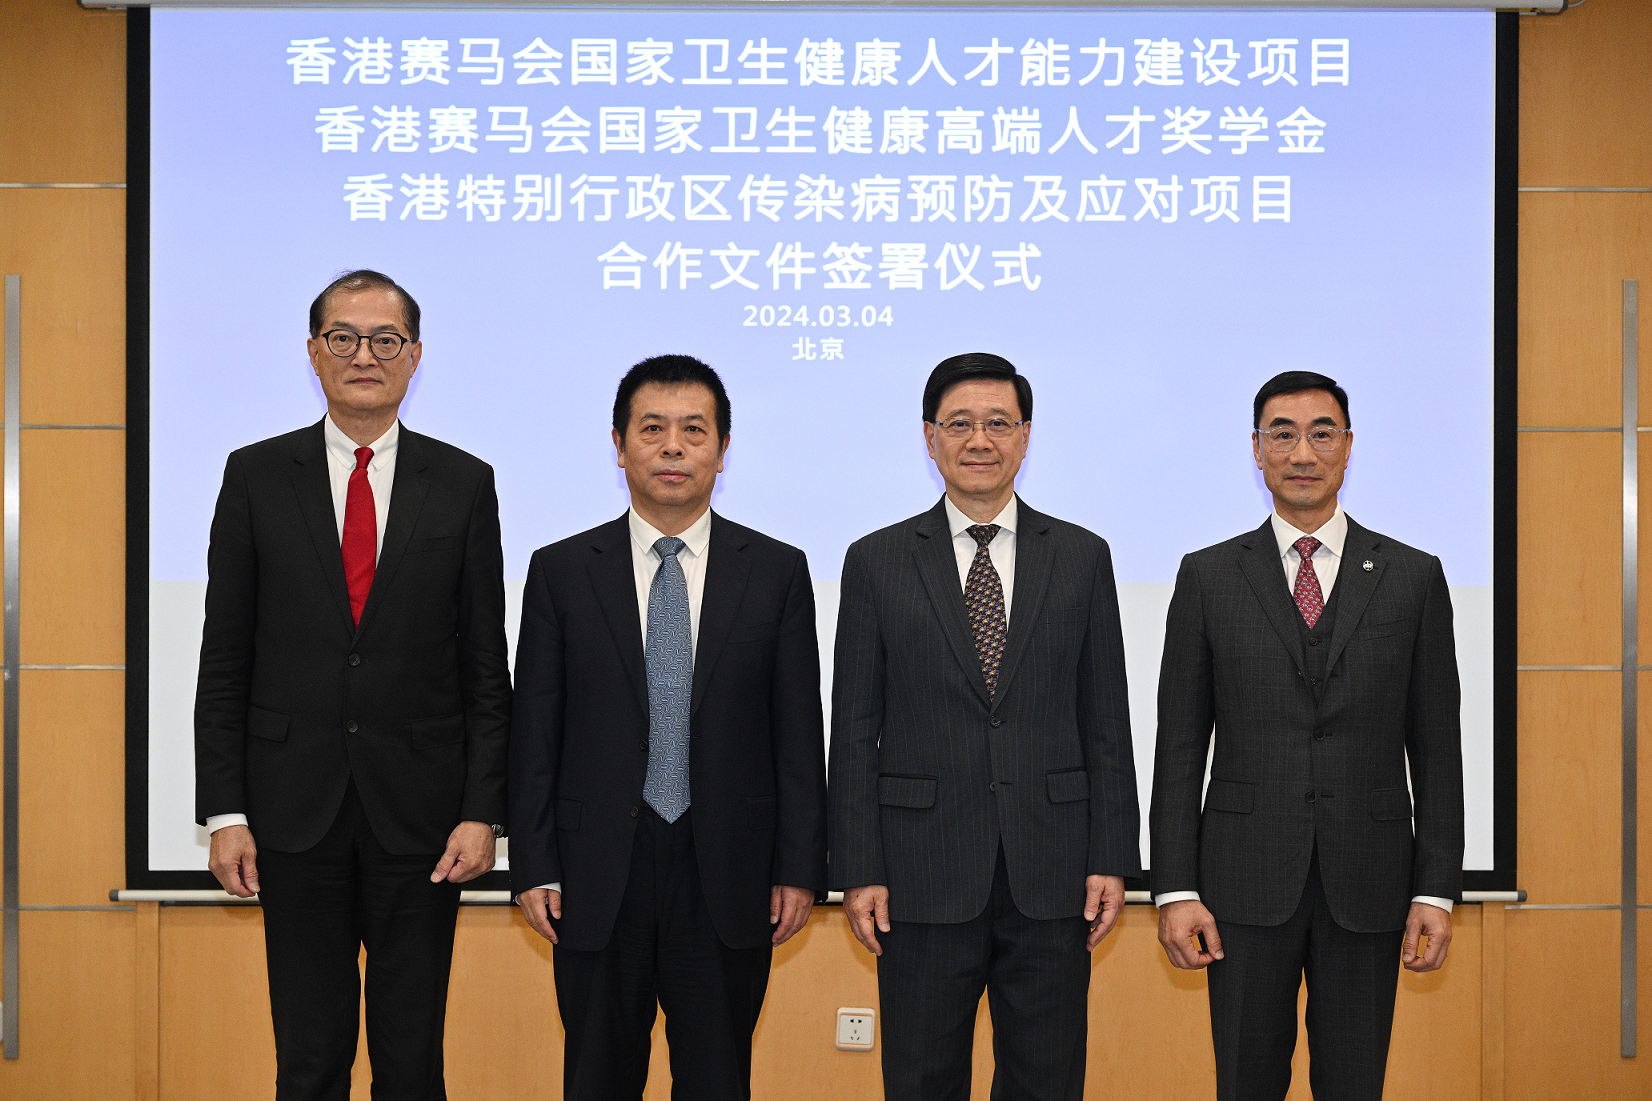 The Chief Executive, Mr John Lee, attended a signing ceremony of co-operation documents in Beijing today (March 4), witnessing the signing of co-operation documents between the Hong Kong Jockey Club and the National Health Commission (NHC) and the Health Bureau respectively on strengthening the training of healthcare talent and commencing projects on the prevention and response against local communicable diseases. Photo shows Mr Lee (second right); Vice-minister of the NHC Mr Lei Haichao (second left); the Secretary for Health, Professor Lo Chung-mau (first left); and the Chairman of the Hong Kong Jockey Club, Mr Michael Lee (first right), at the ceremony.